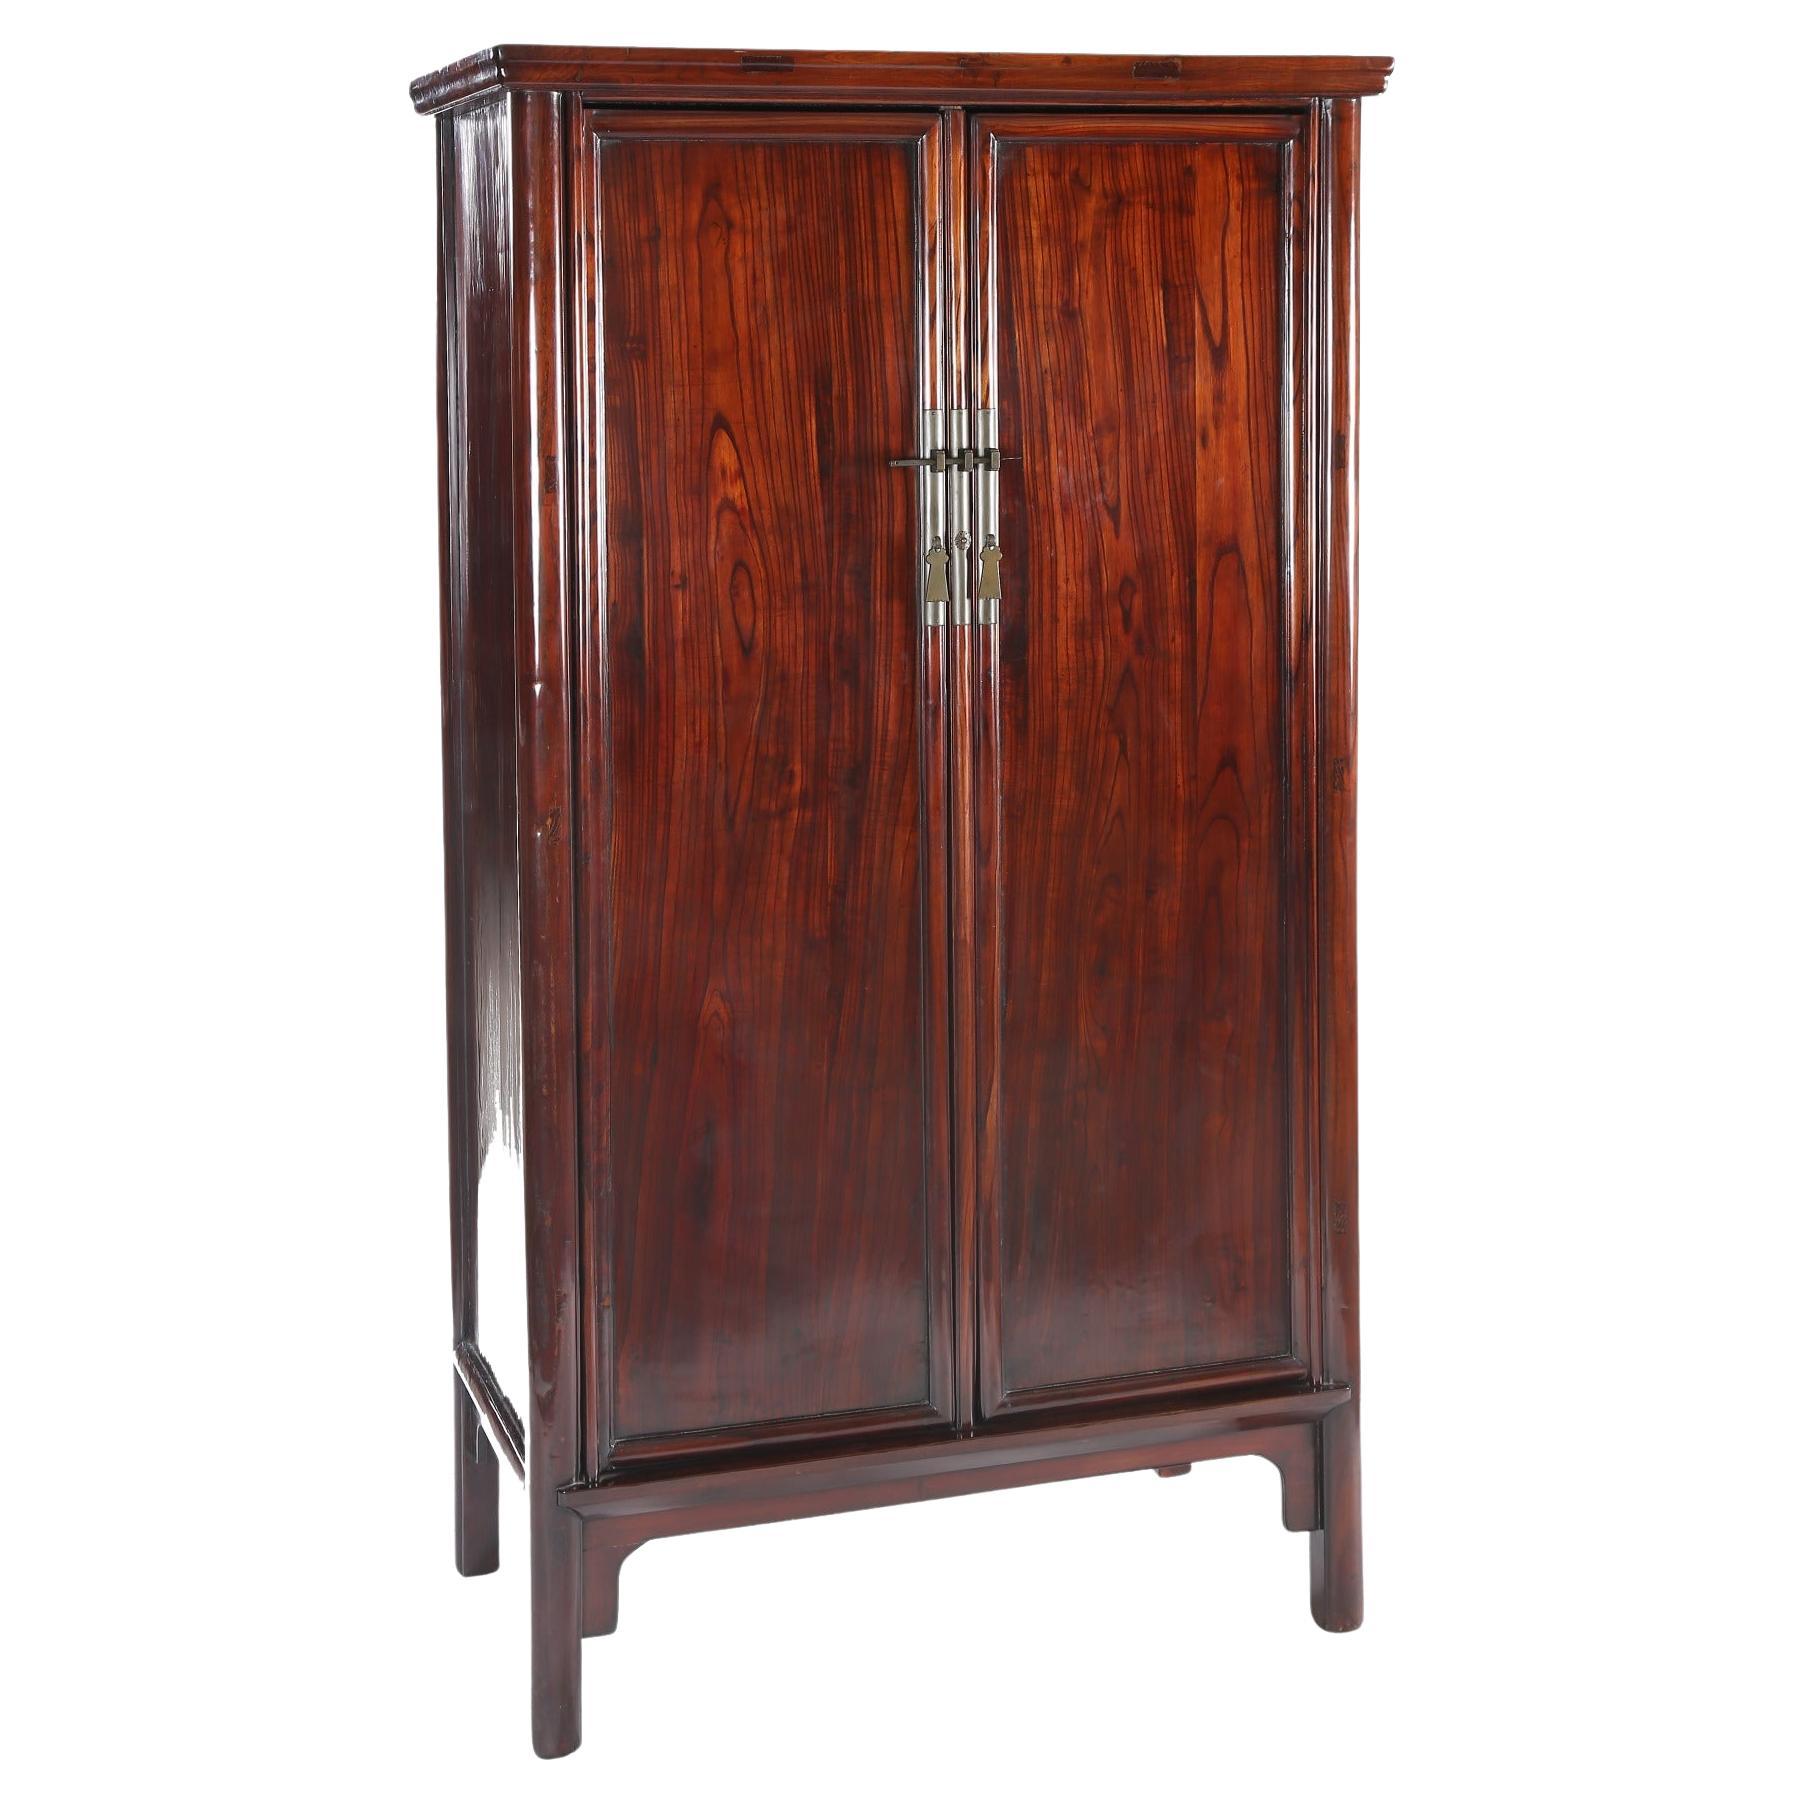 FINE TAPERED ROUND CORNER CABINET

The cabinet with protruding molded edge, supported by rounded side posts, a pair of paneled doors with central stile, opening to reveal three shelves with the mid-shelf forming the top of two drawers, the side